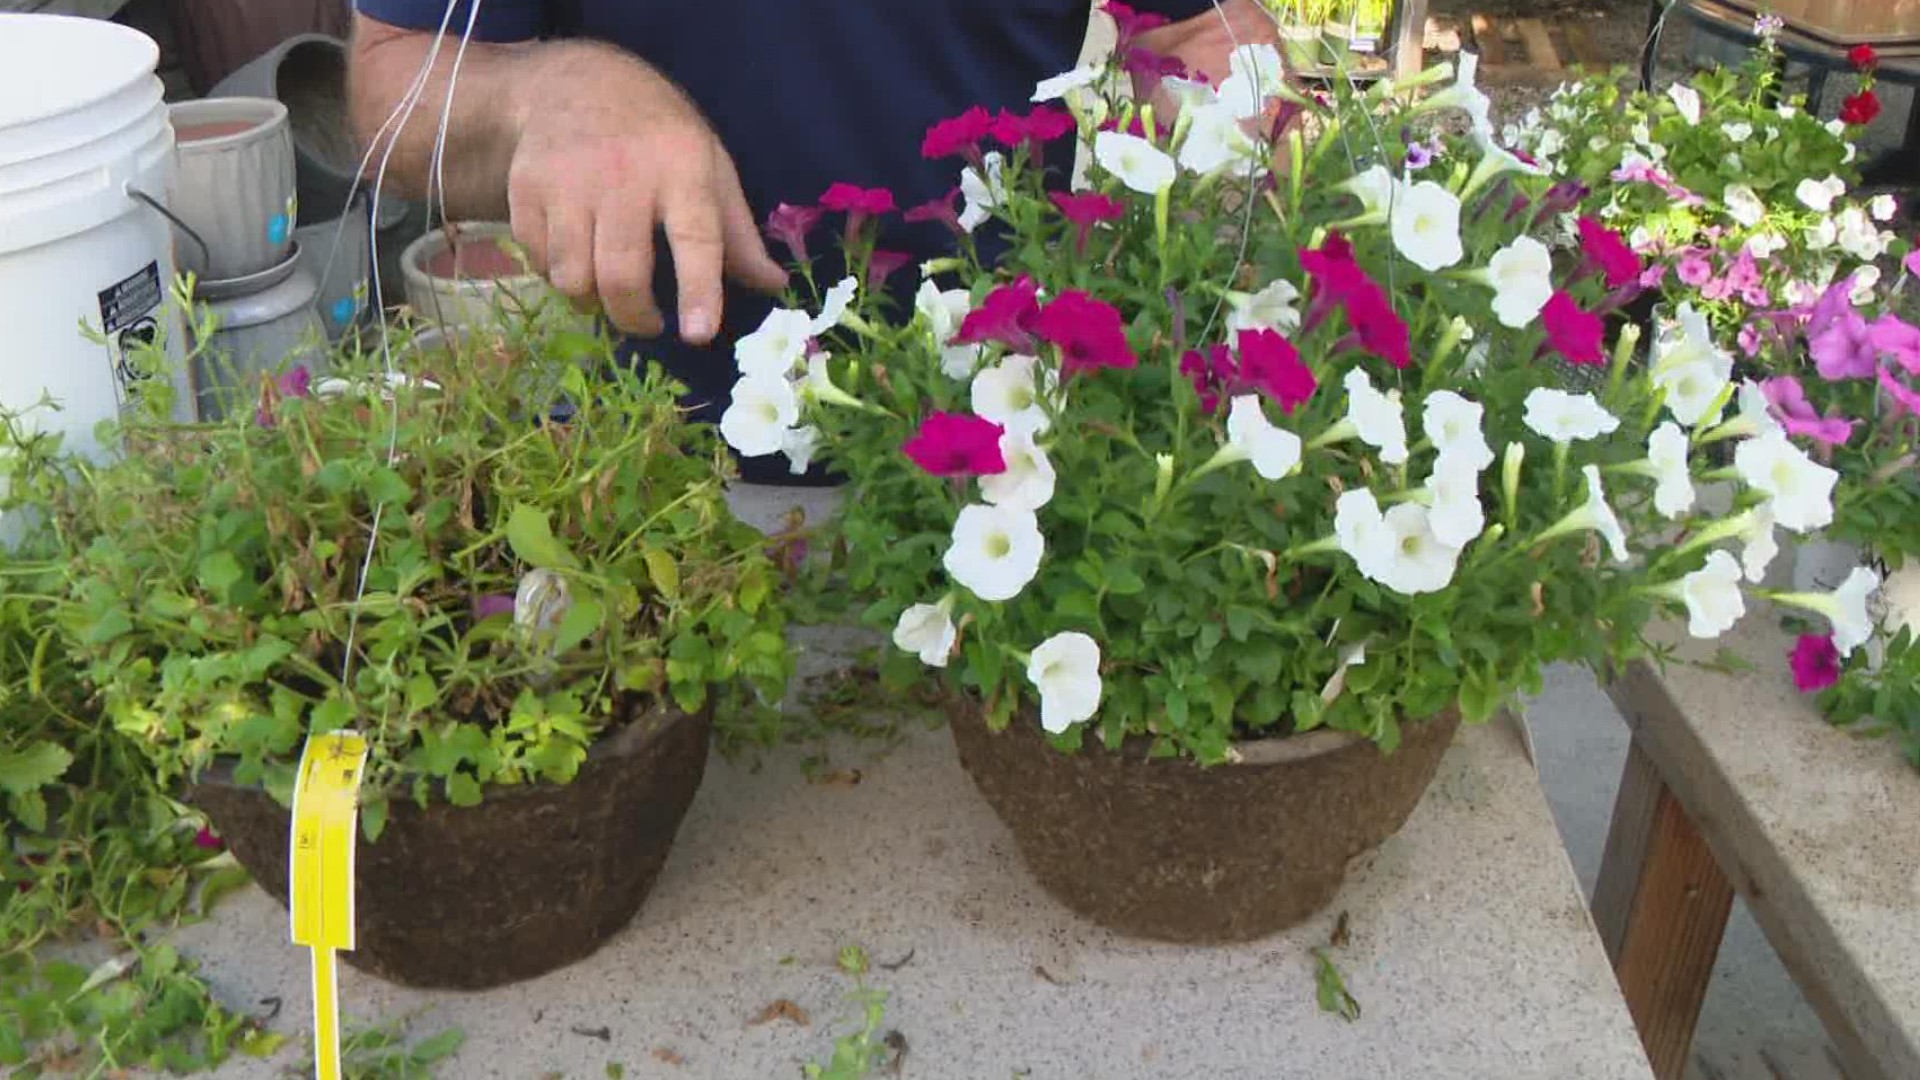 After the July Fourth holiday, cutting back and fertilizing a hanging basket plant will spur new growth.